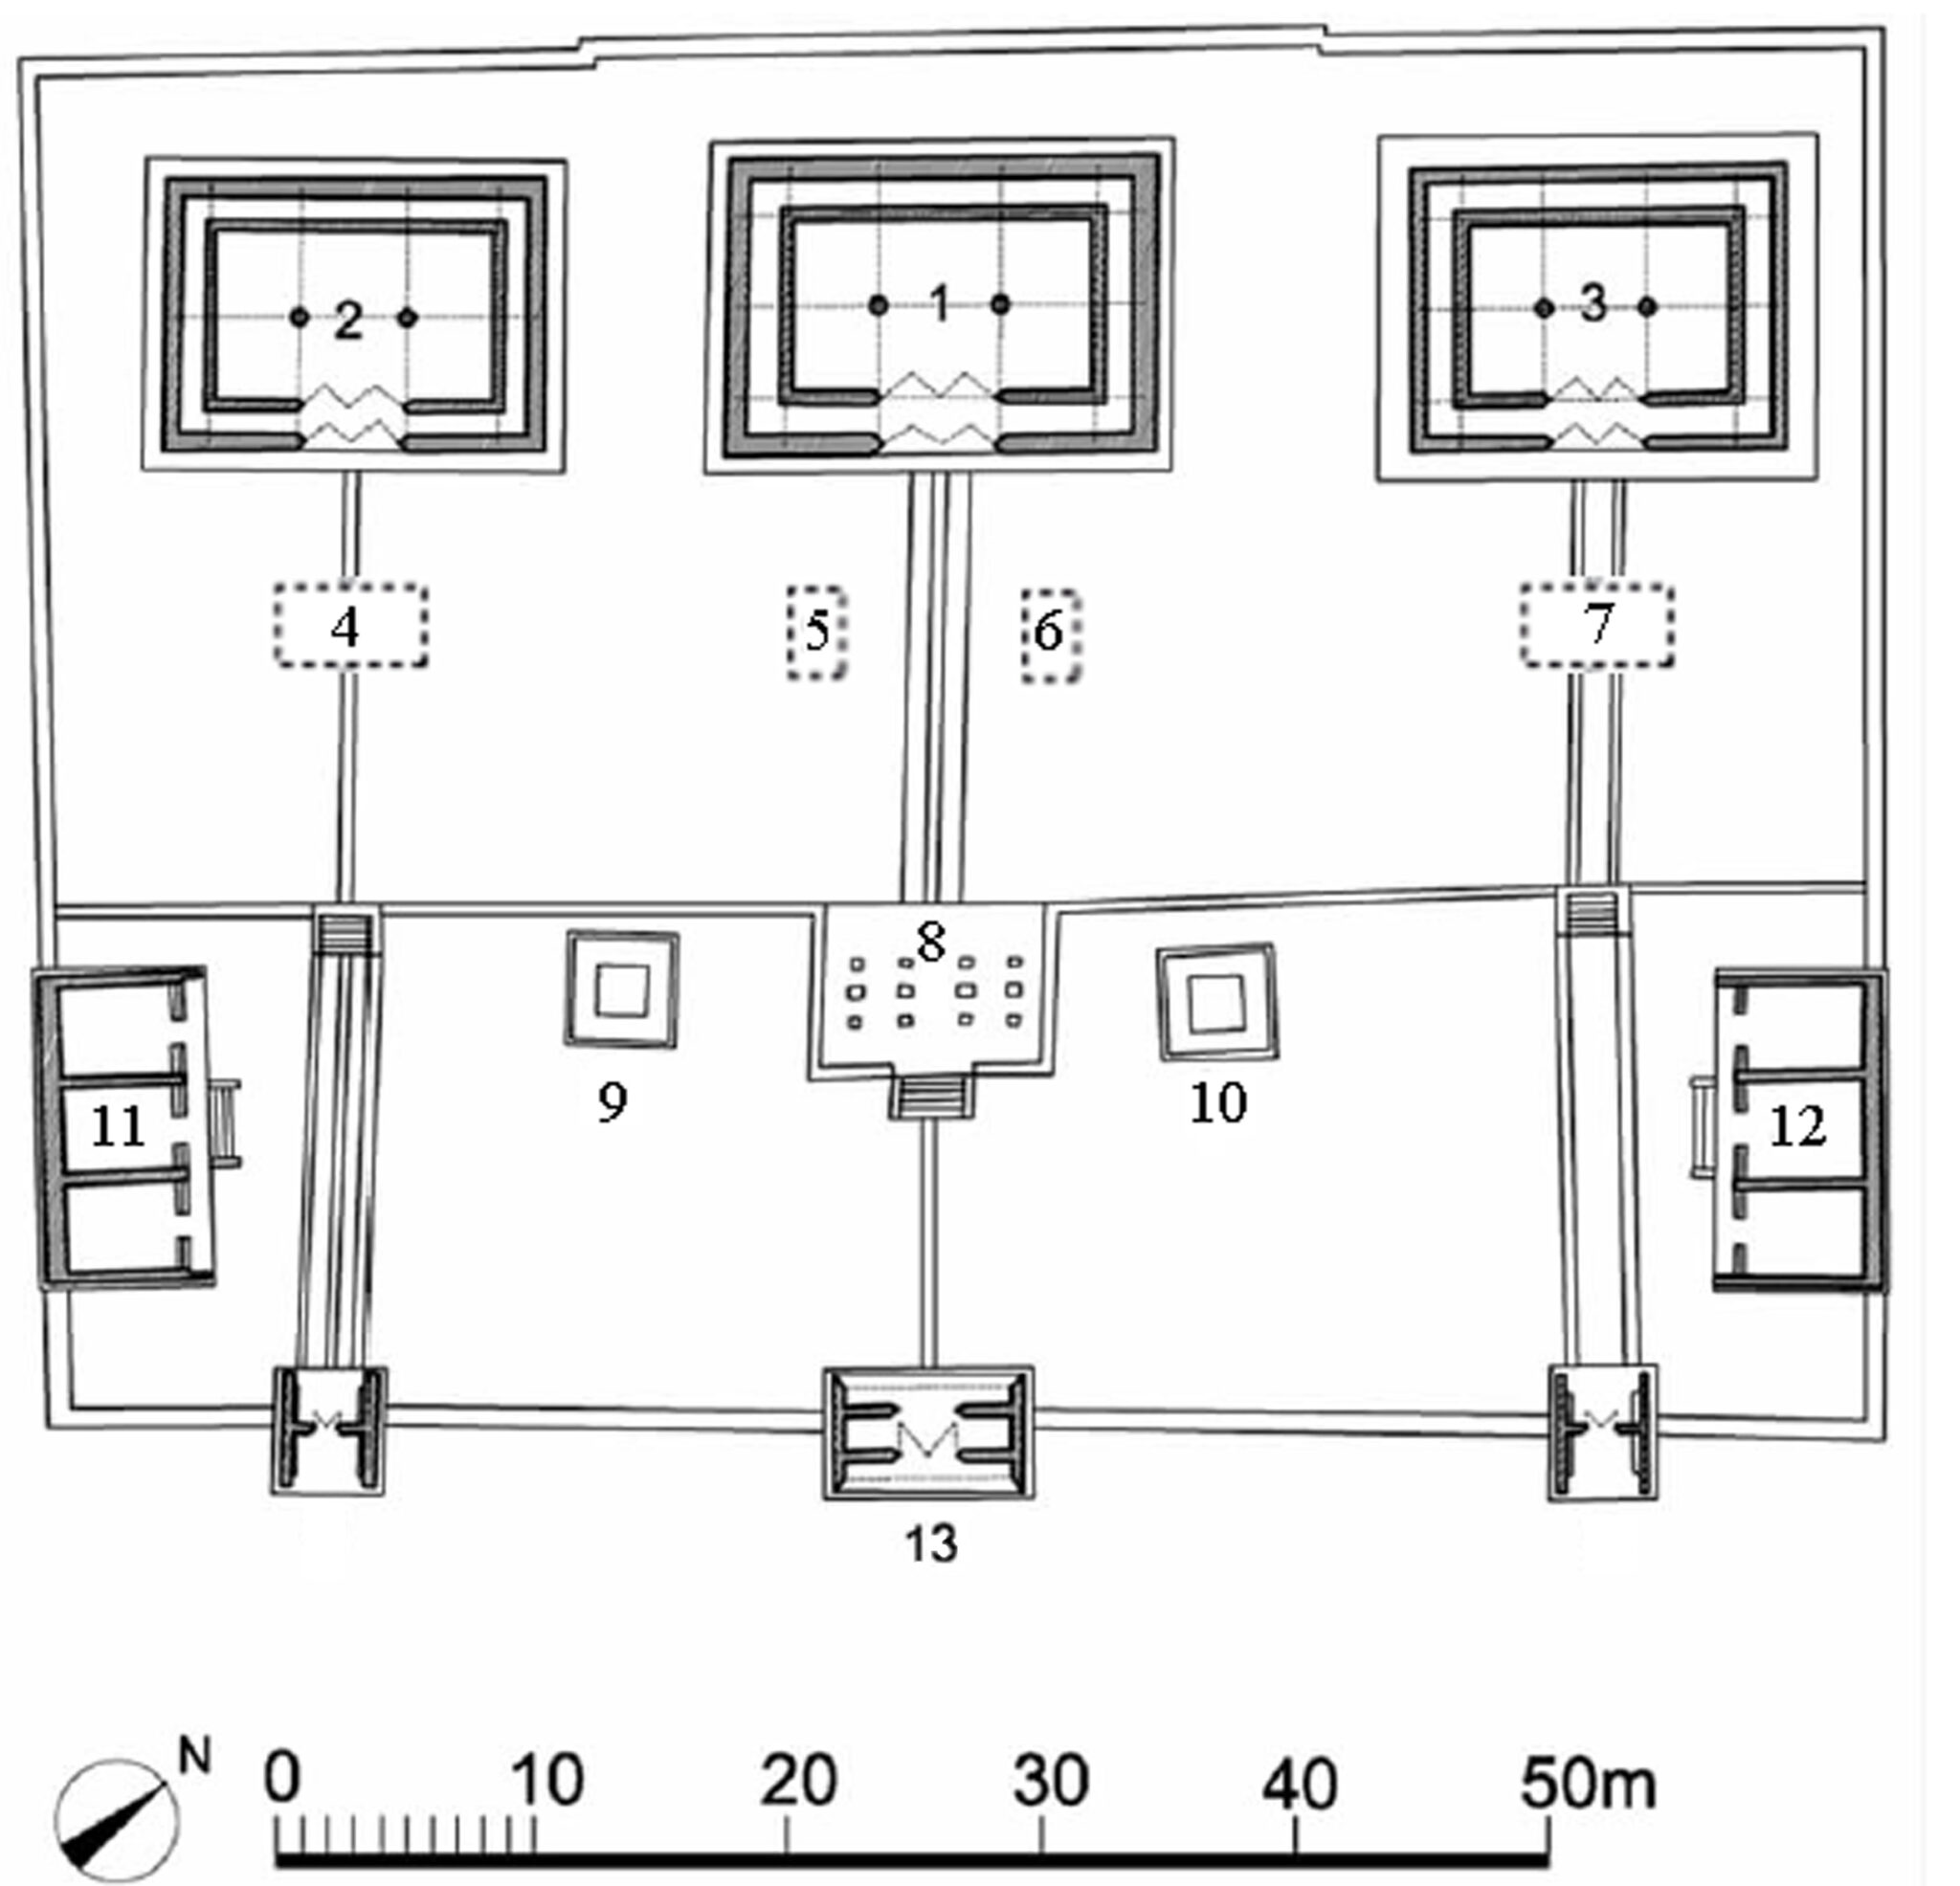 Black and white diagram describing architectural footprint of temple complex with component structures numbered